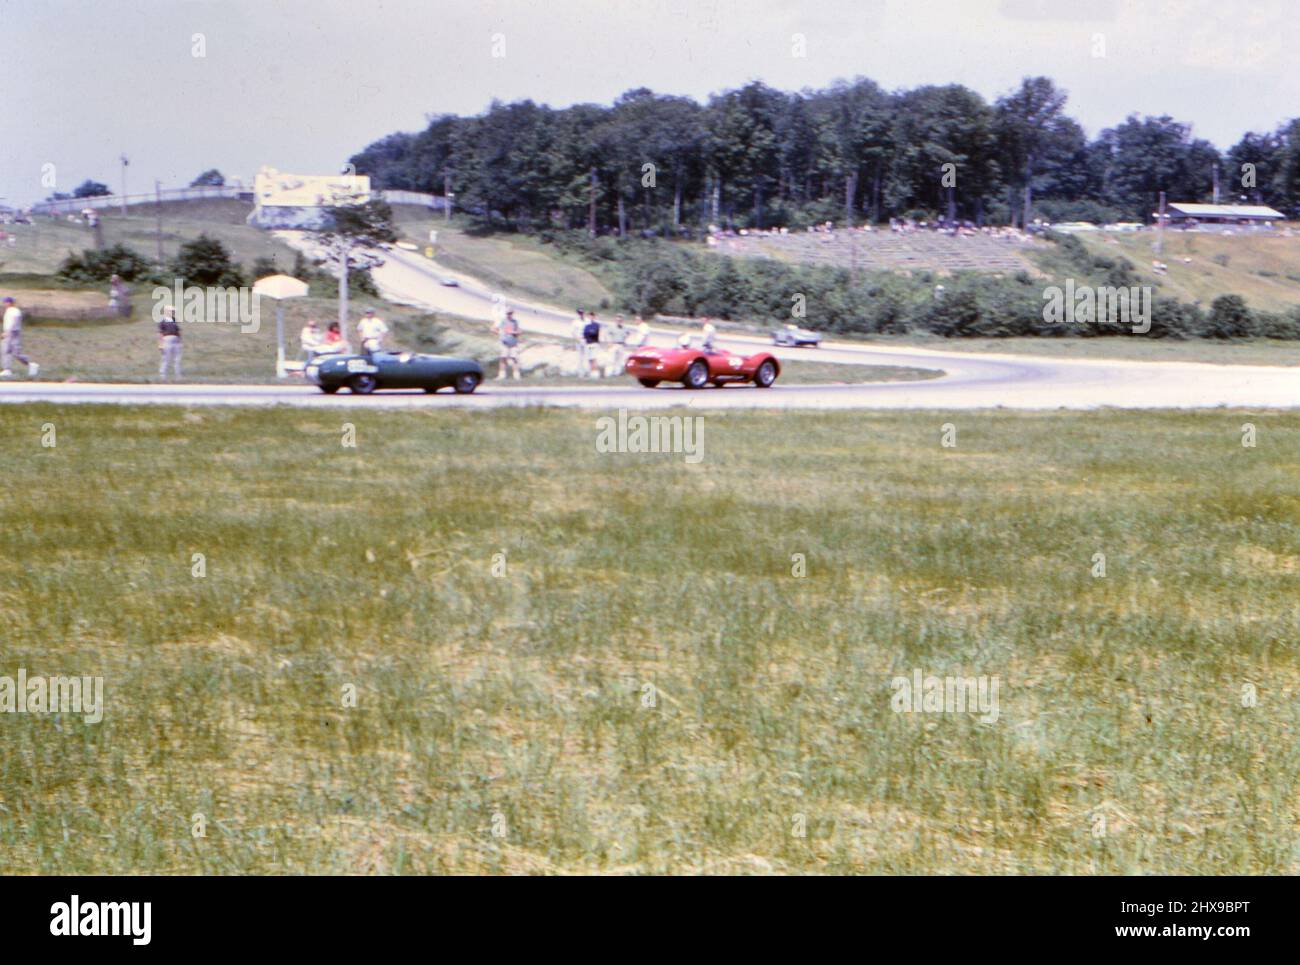 1960s Auto Racing: Race cars taking a turn on an unidentified race track oca. 1963 Stock Photo